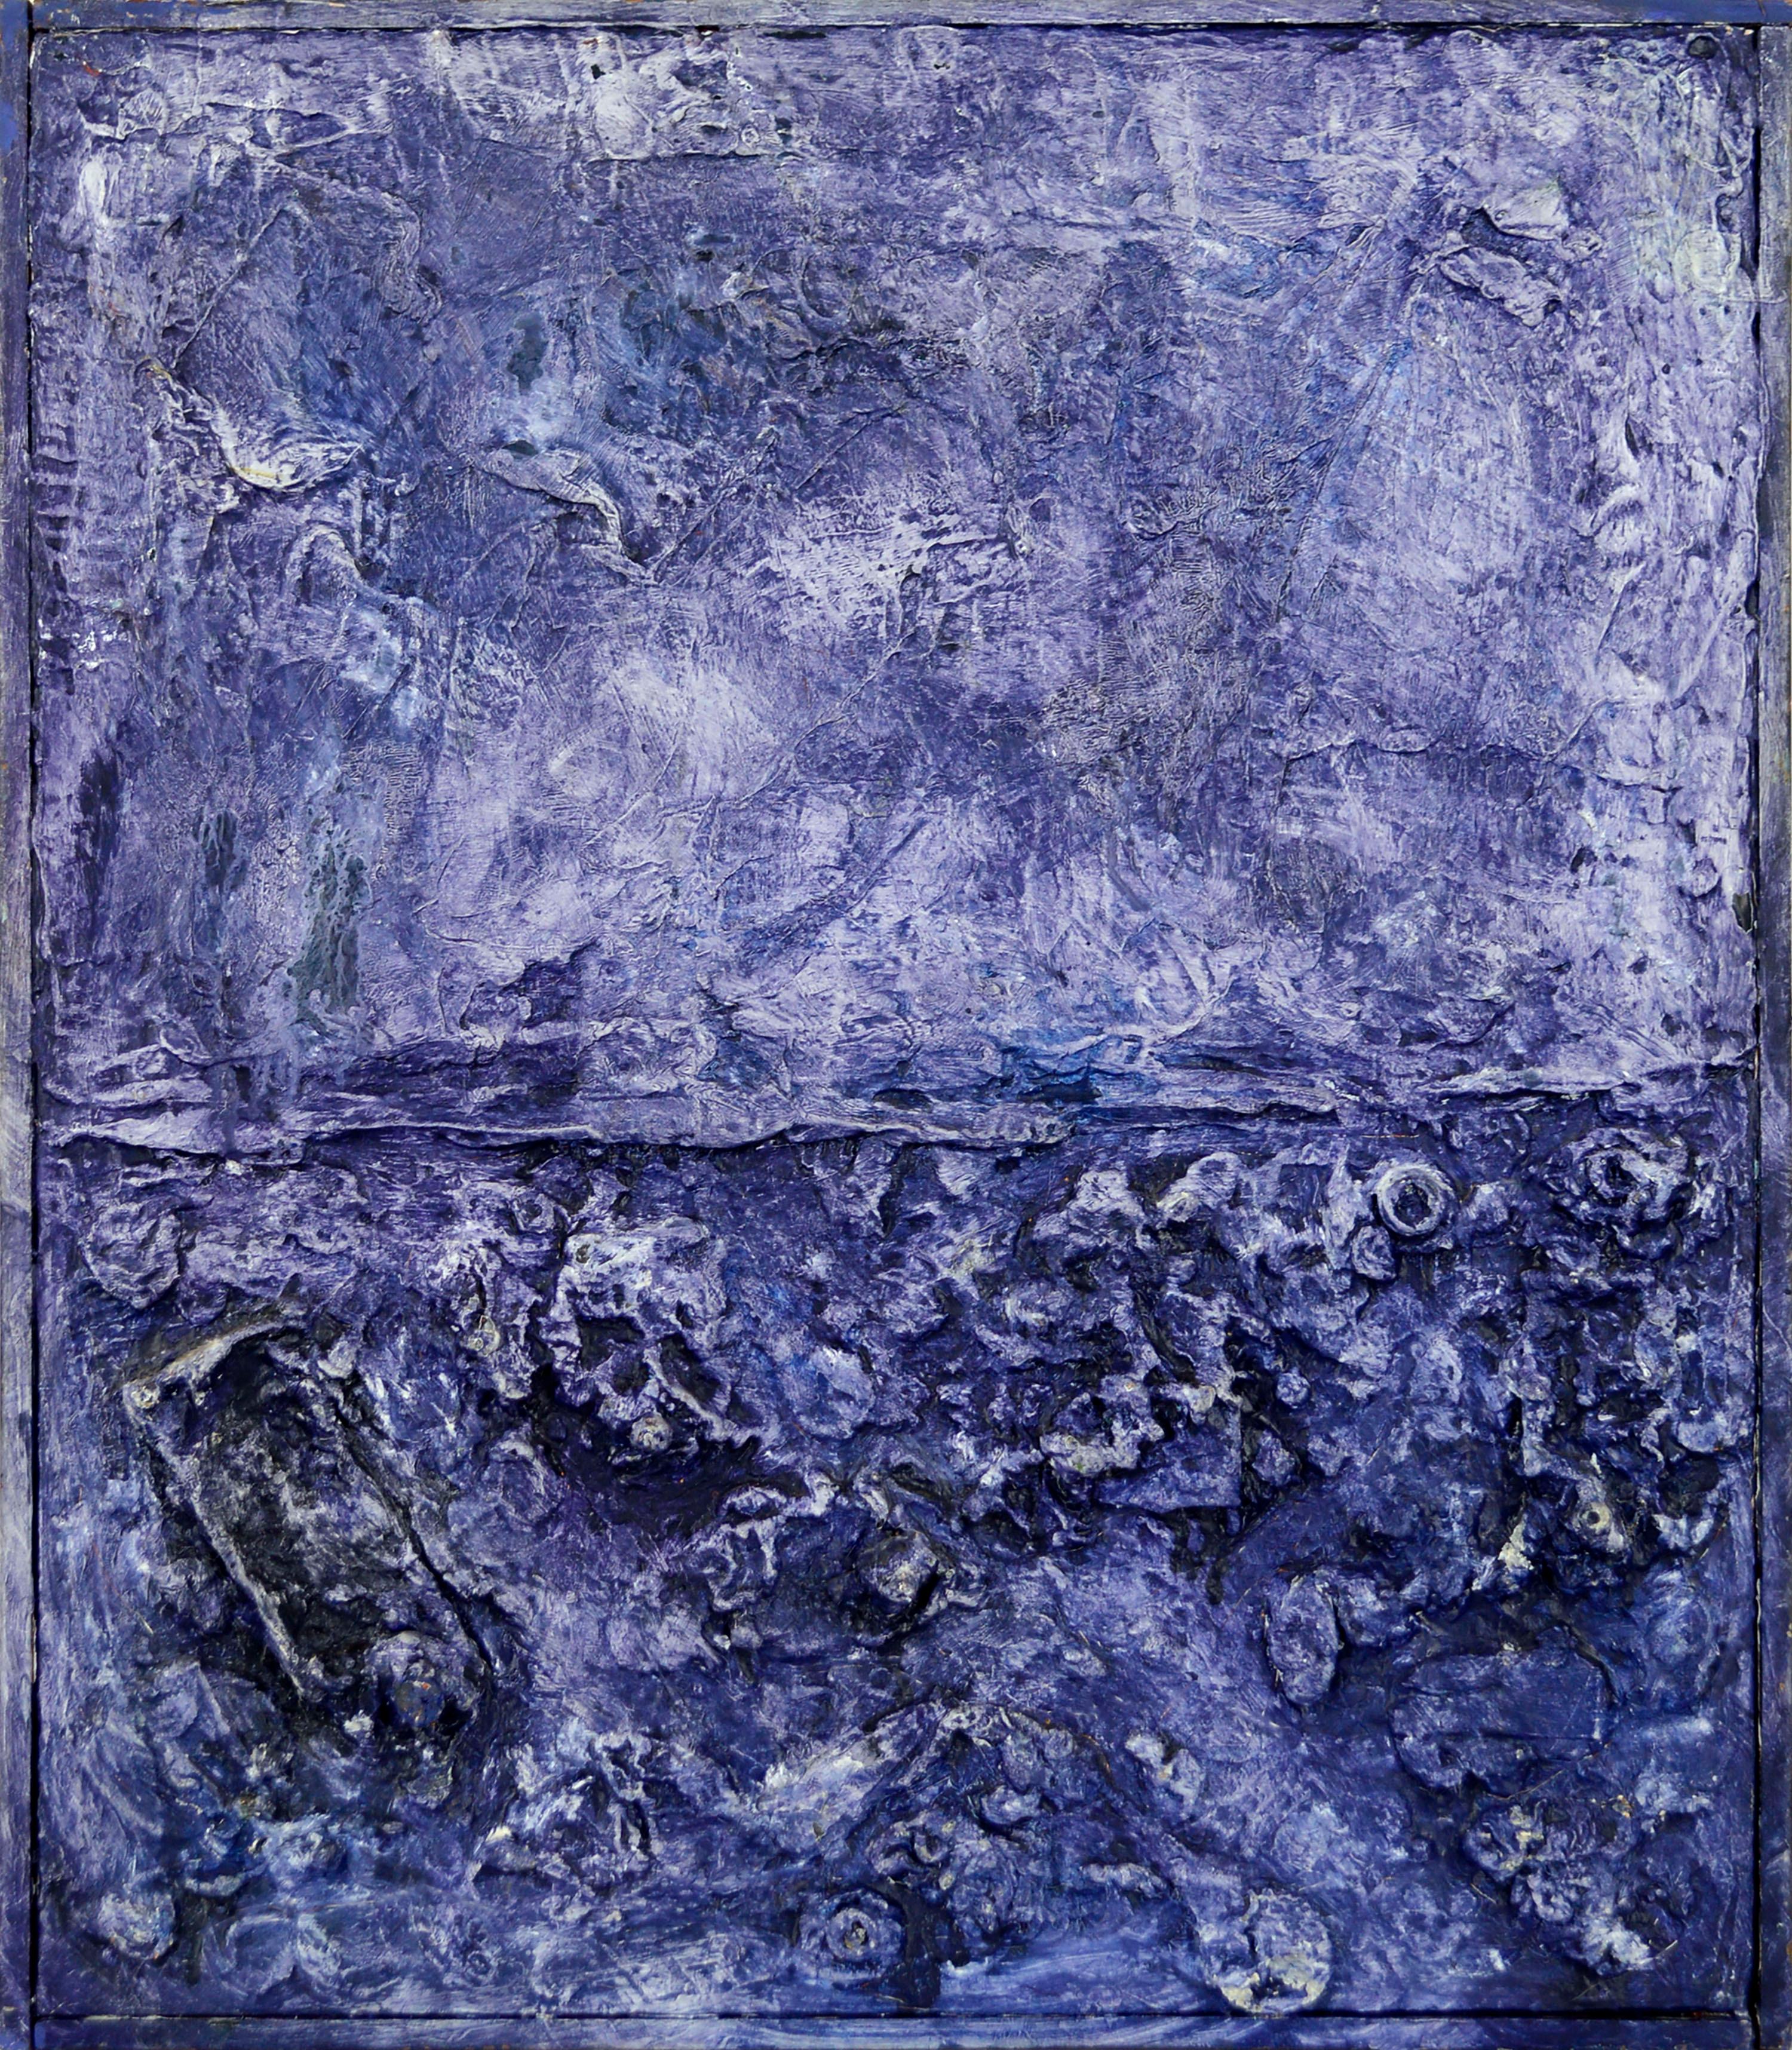 Mid Century Textural Color-Field Abstract in Royal Blue-Purple by Peter Witwer